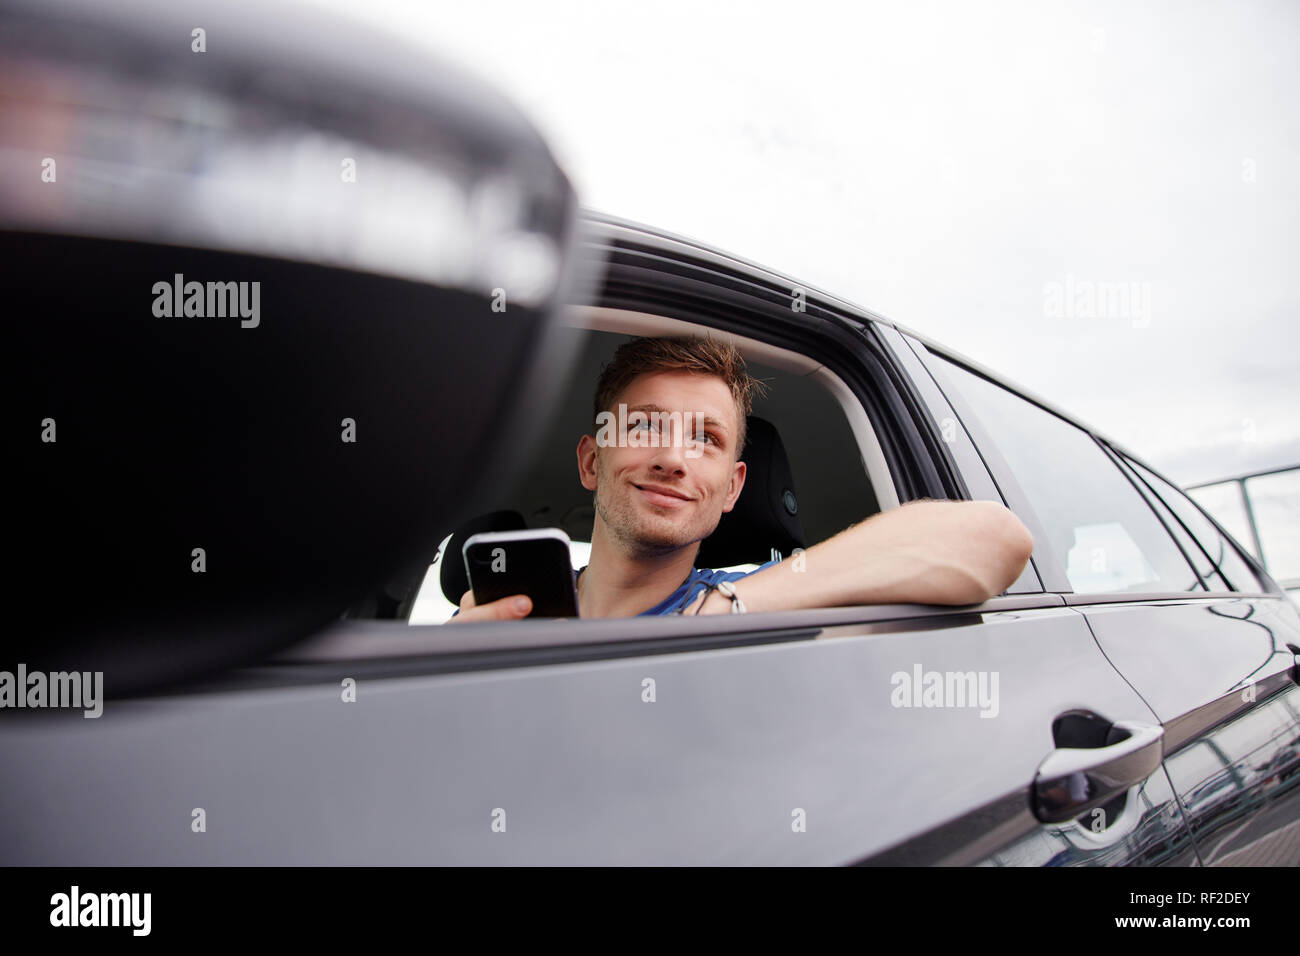 Smiling young man with cell phone in a car Stock Photo